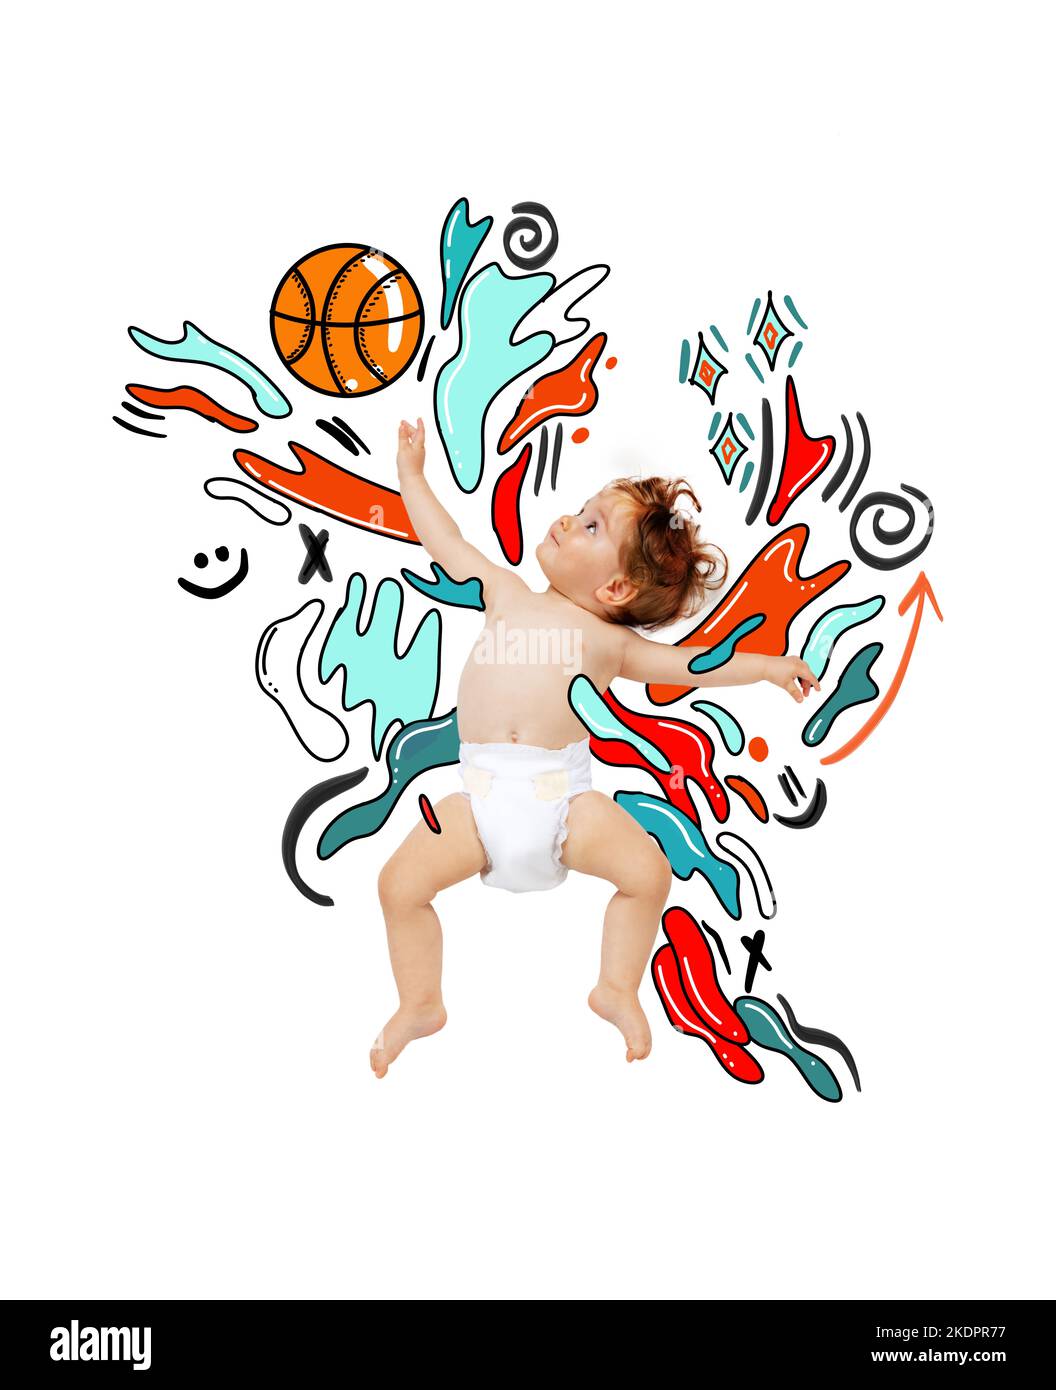 Creative colorful design. Contemporary art collage. Little cute baby boy in diaper dreaming to become famous sportsman, basketball player Stock Photo